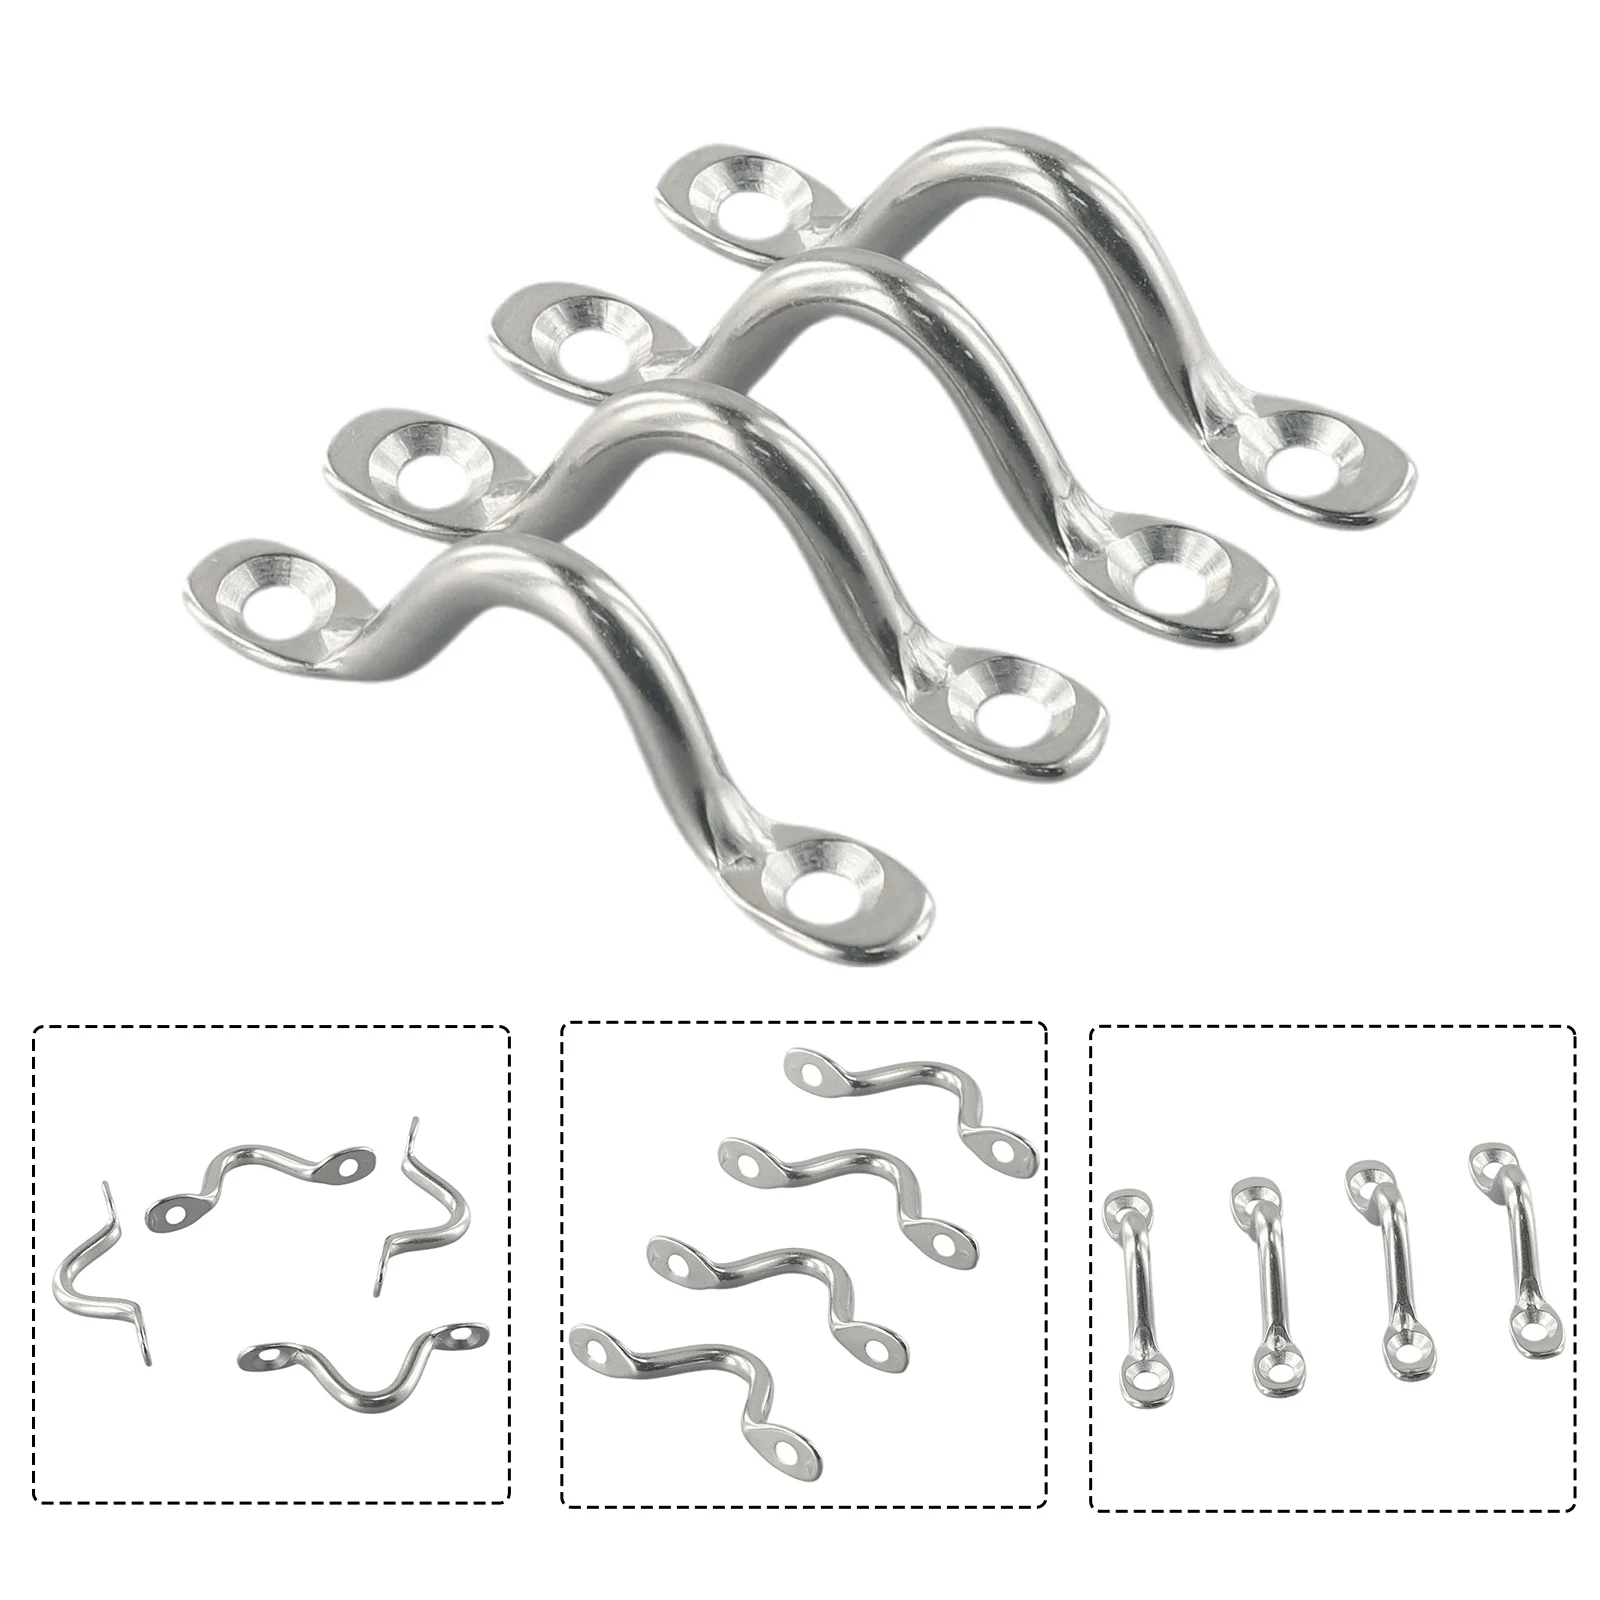 

4pcs 5mm Stainless Steel Handles Wire Eye Strap Boat Marine Tie Down Fender Hook Canopy Silver RV Engines Accessories